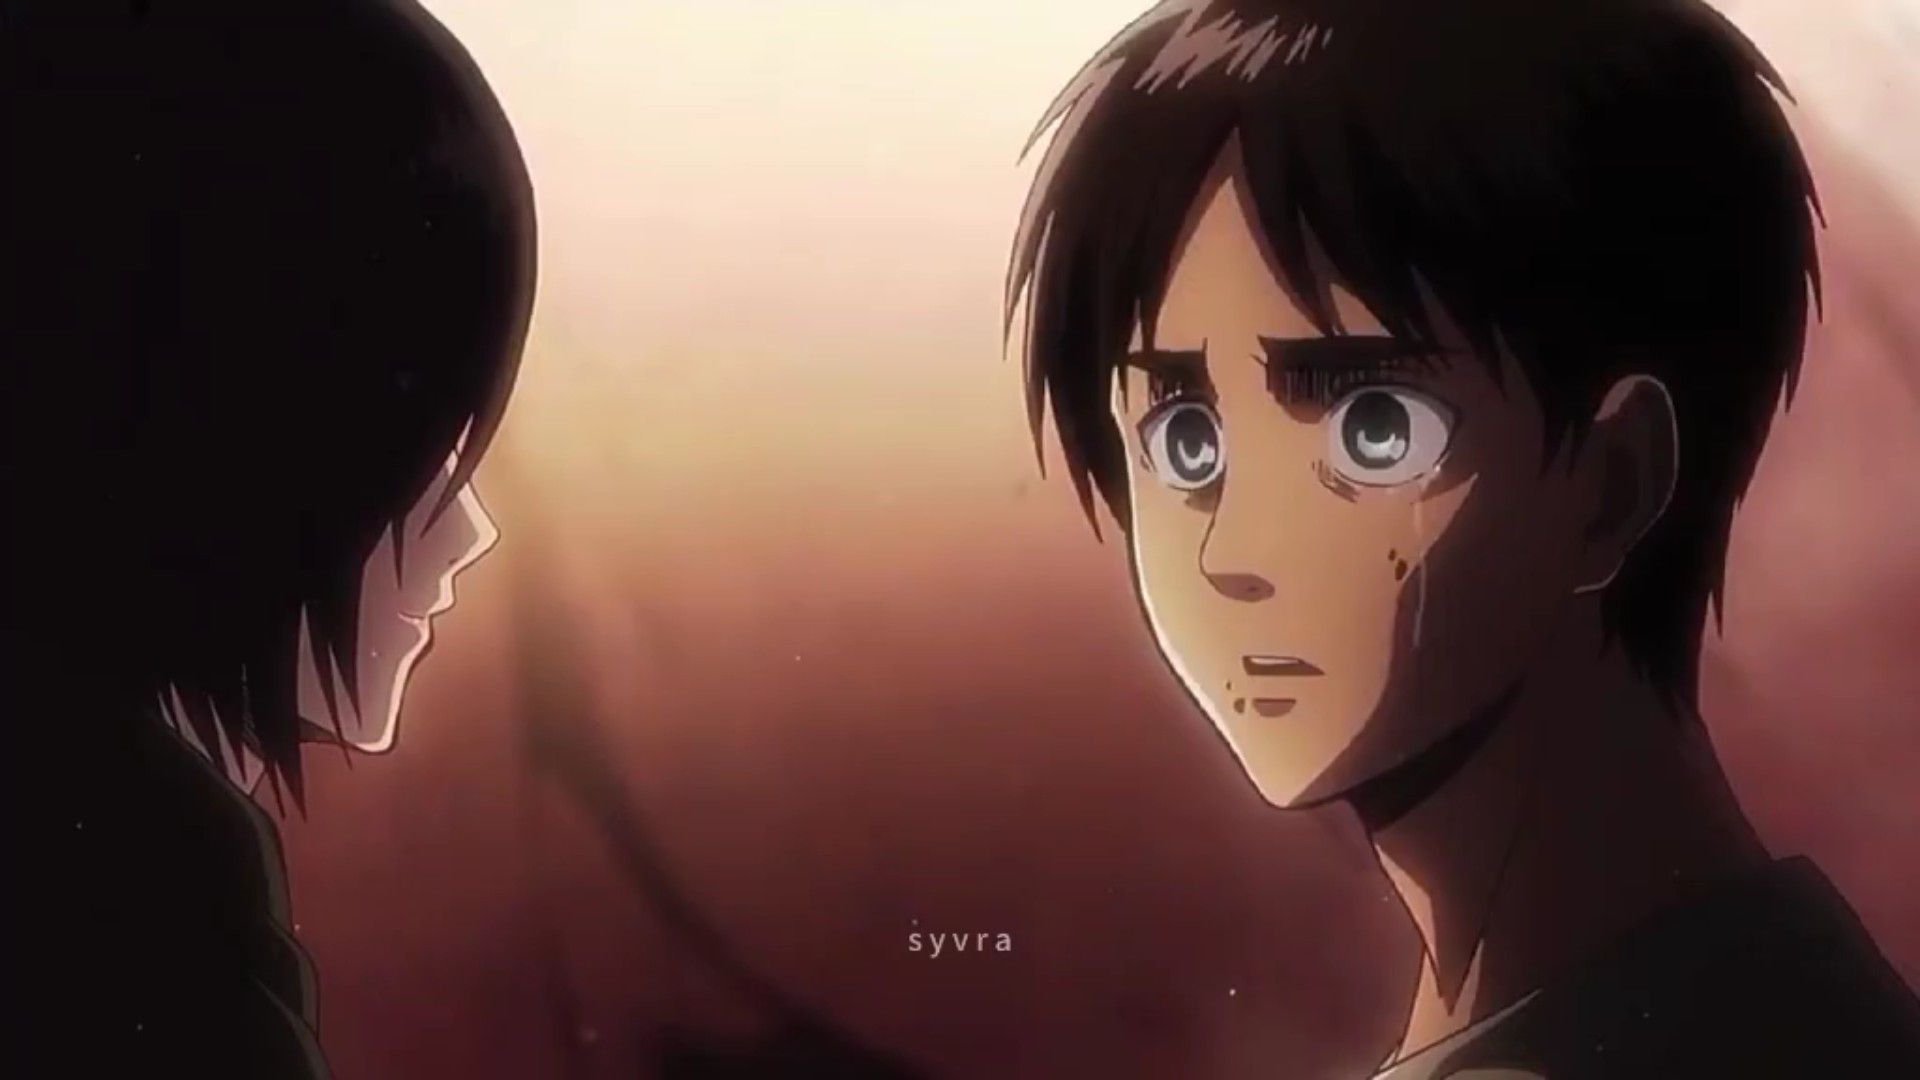 Stream Attack on Titan S4 Part 2 Episode 12 OST: Call of Silence